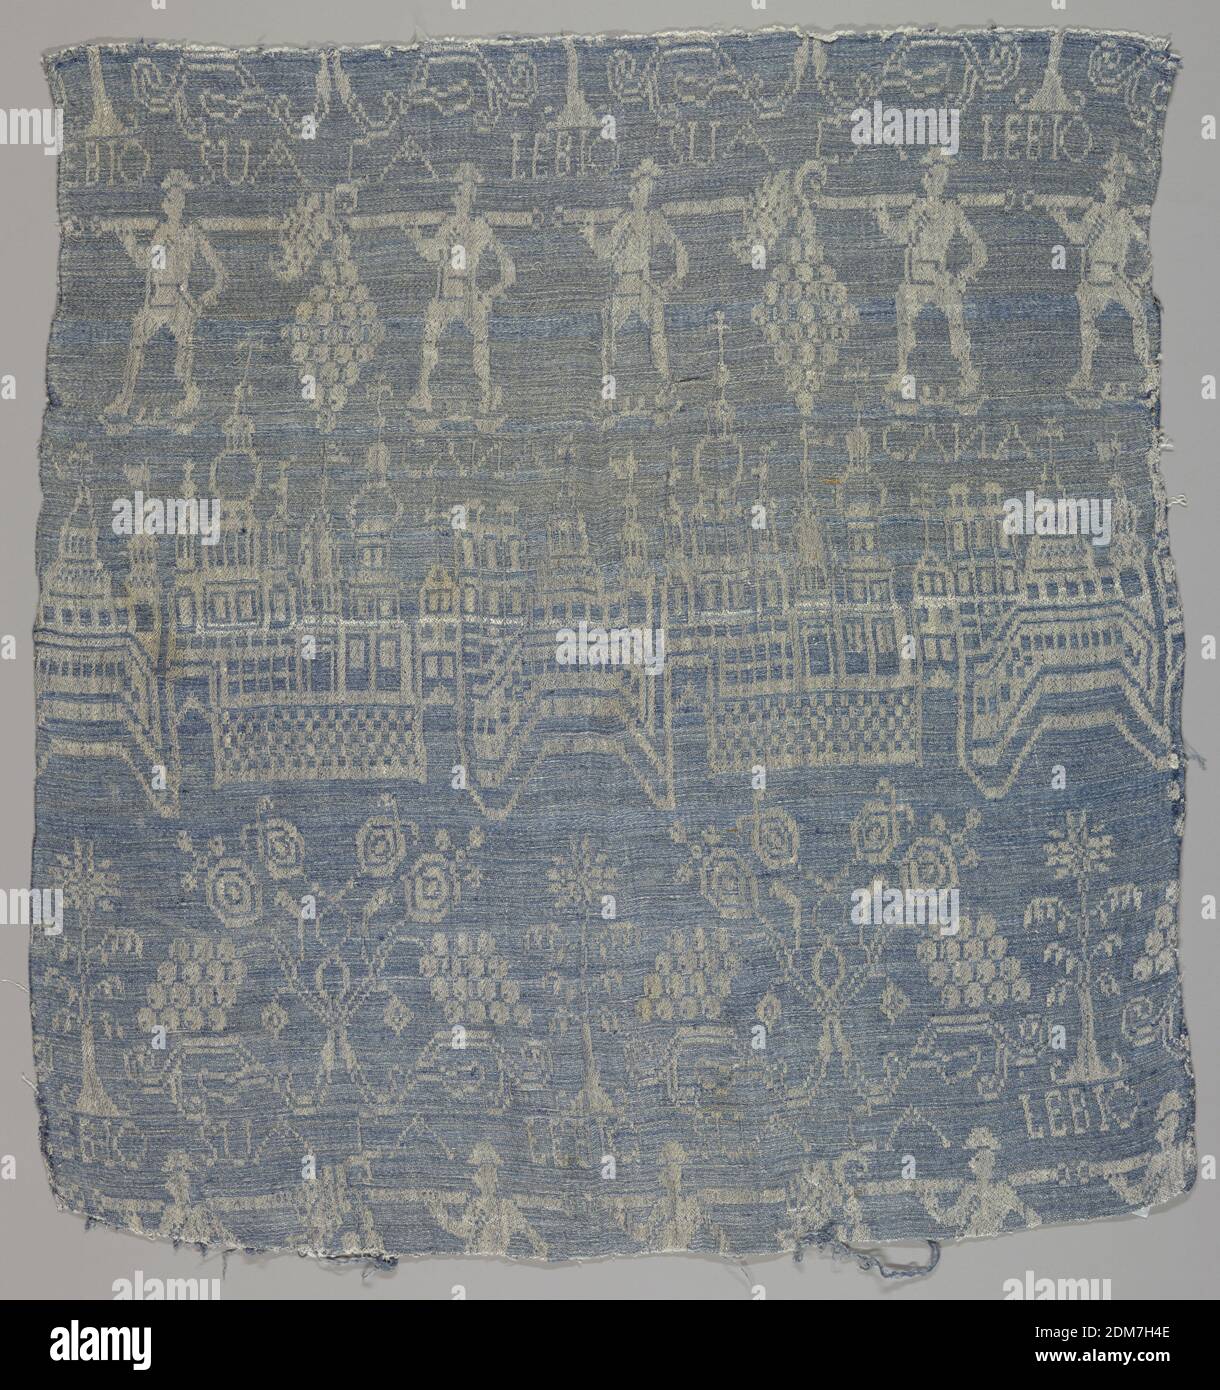 Fragment, Medium: linen Technique: 7&1 satin damask, Blue and white damask with depictions of Jerusalem and the Spies of Eschol., Germany, 17th–18th century, woven textiles, Fragment Stock Photo